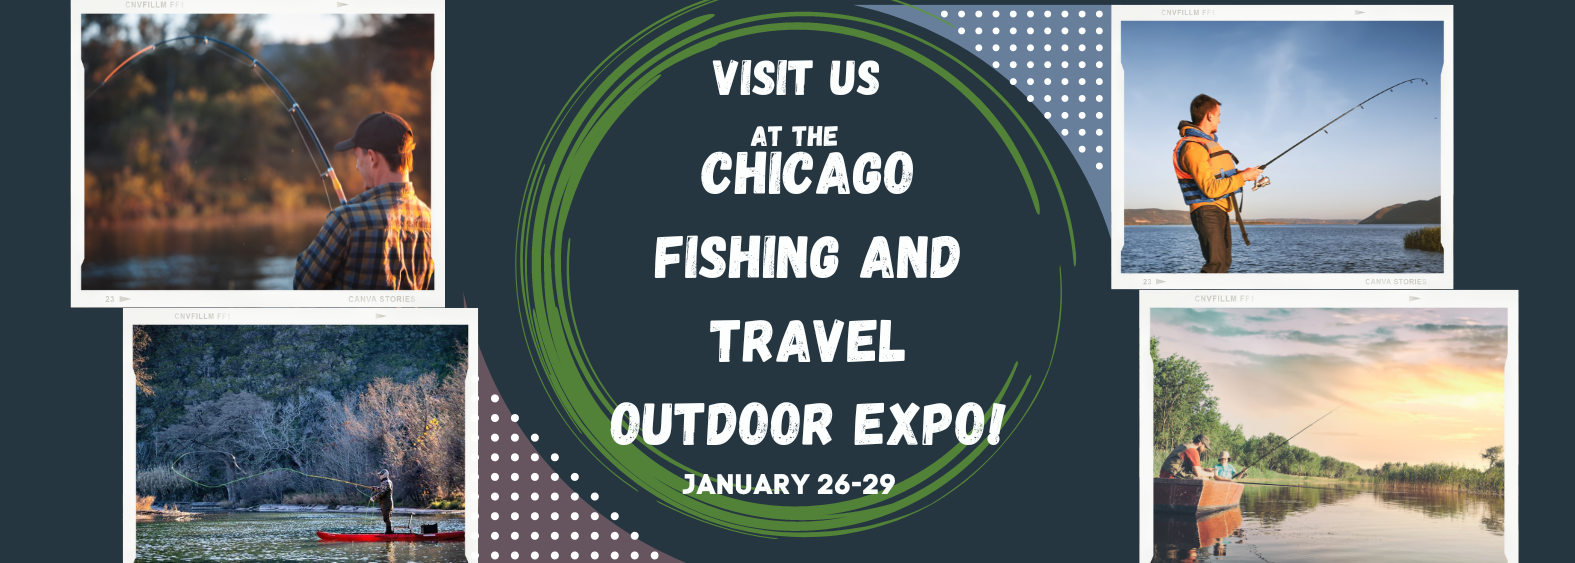 chicagoland fishing travel & outdoor expo promo code